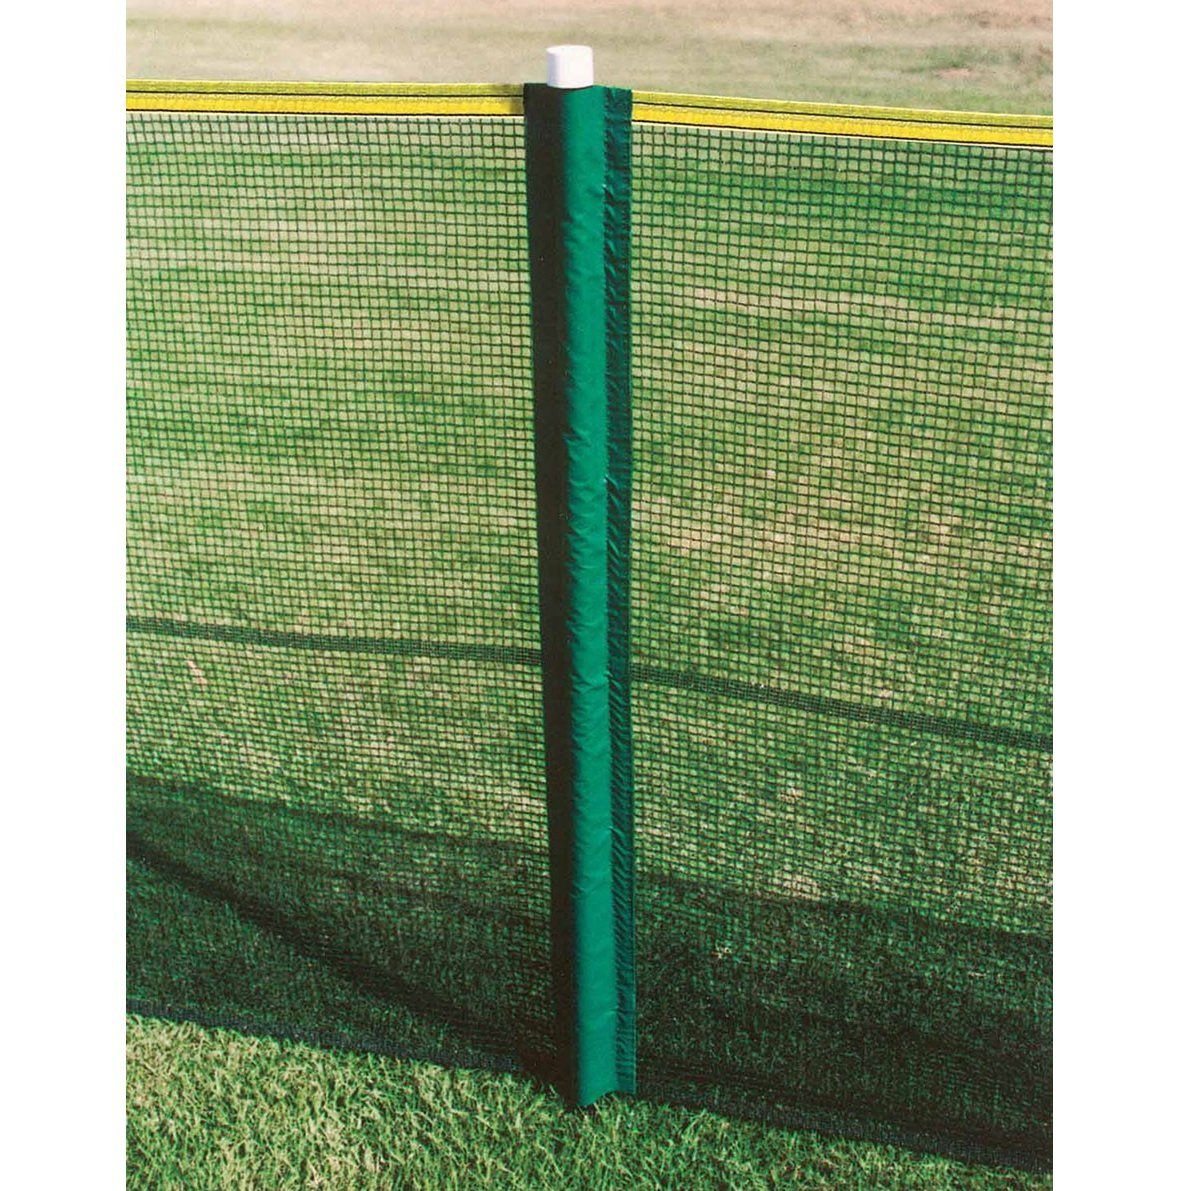 Enduro Markers Inc 300' Homerun Outfield Mesh Fence Package - Pitch Pro Direct